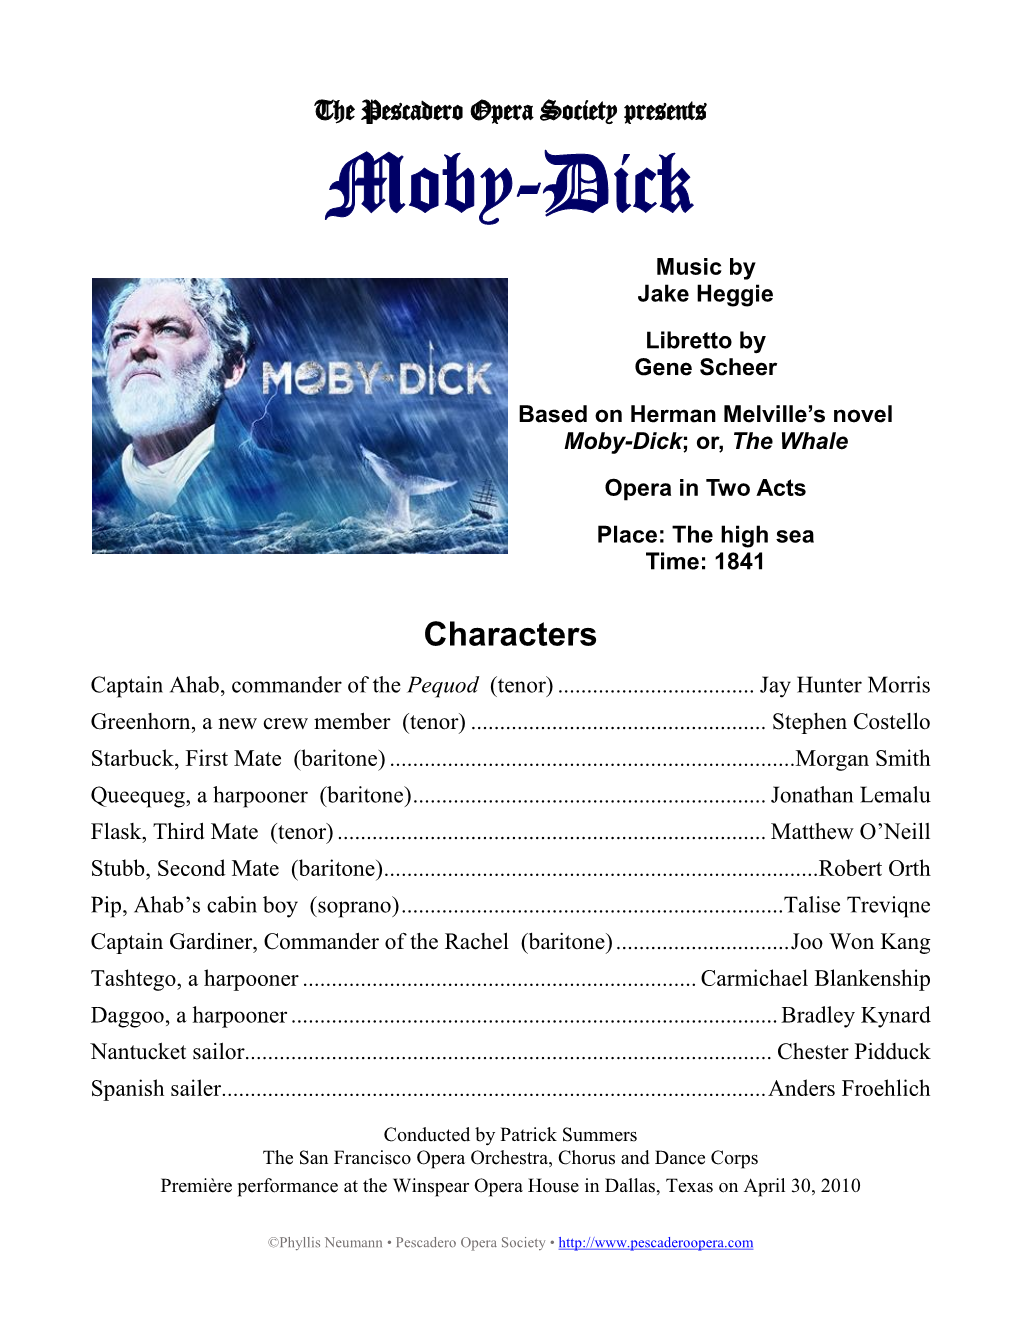 Moby-Dick Music by Jake Heggie